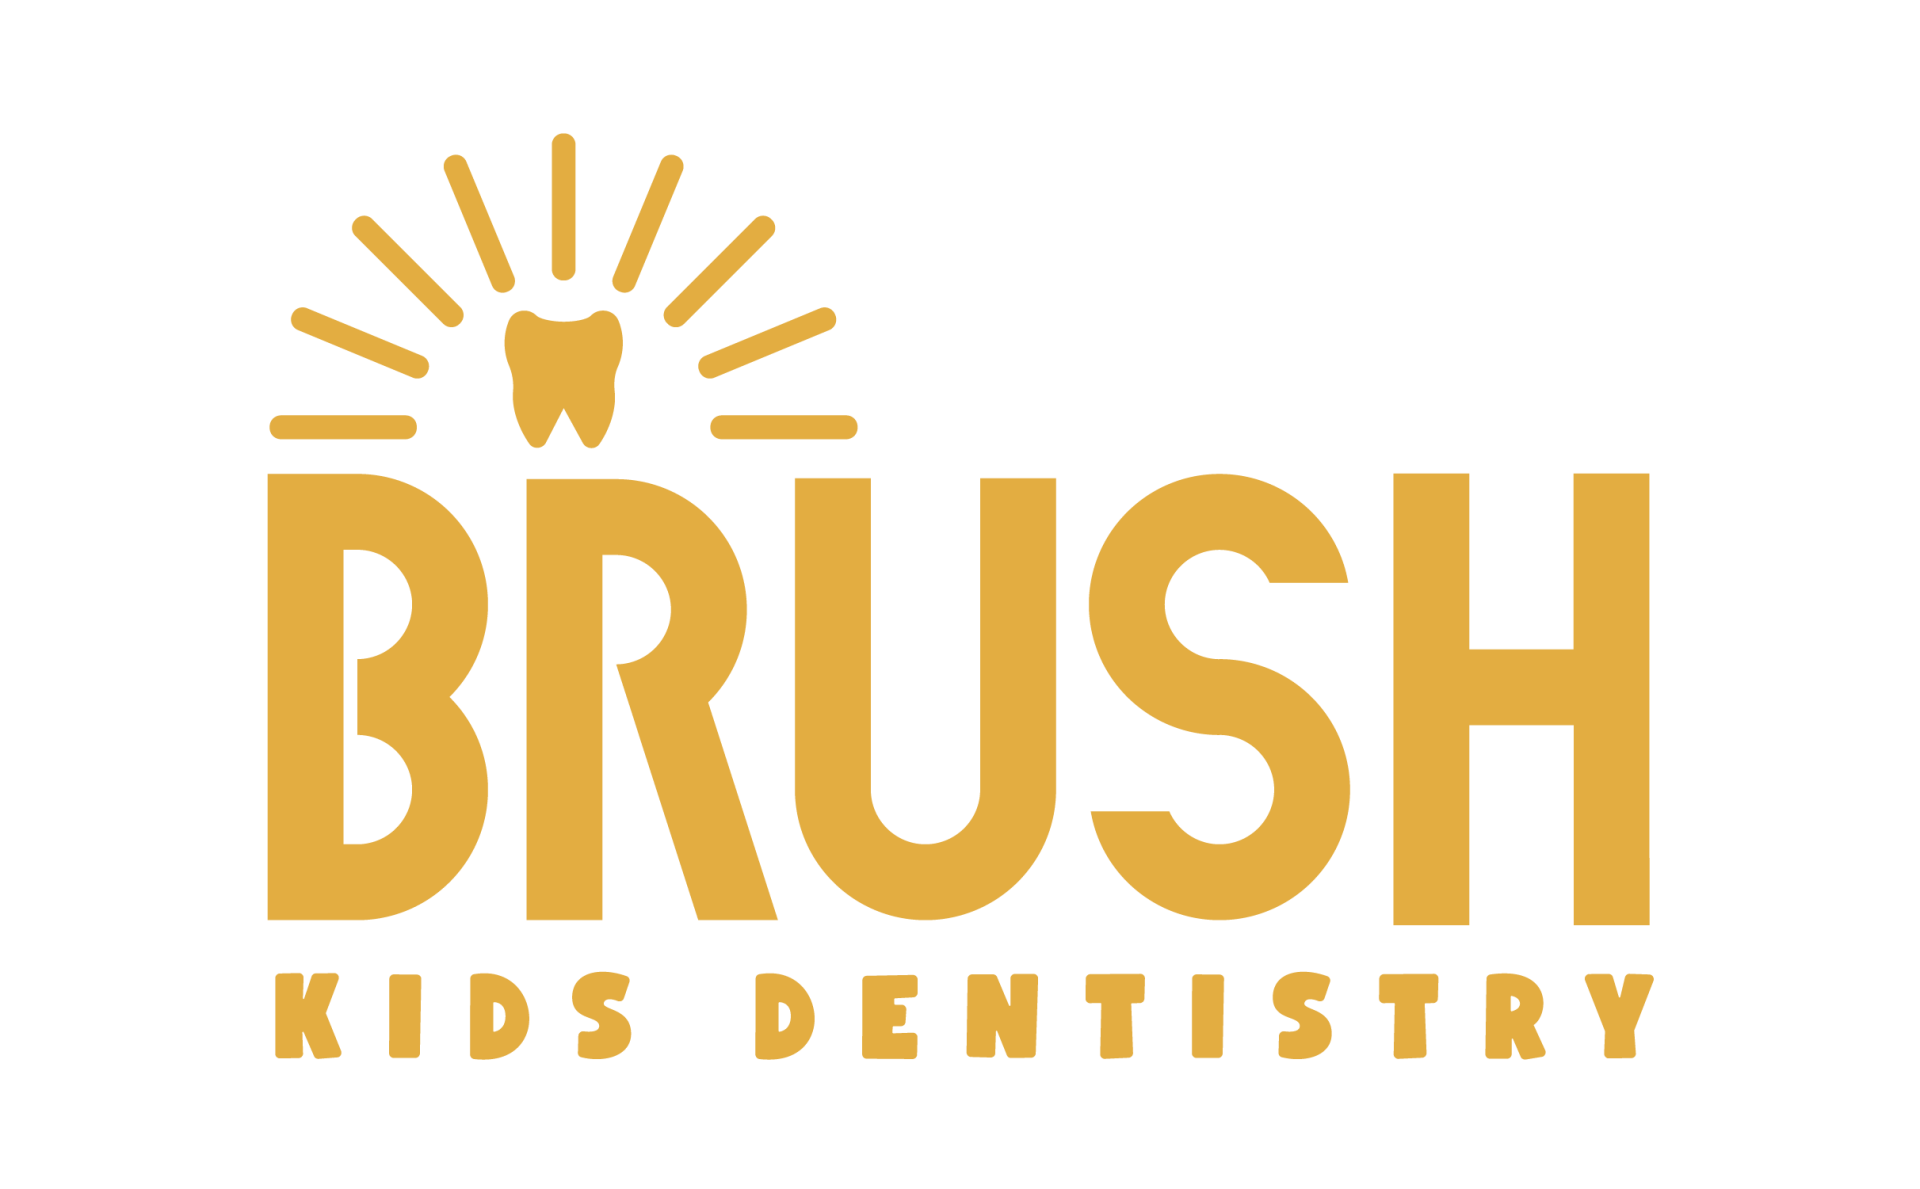 The logo for brush kids dentistry is yellow and has a tooth on it.